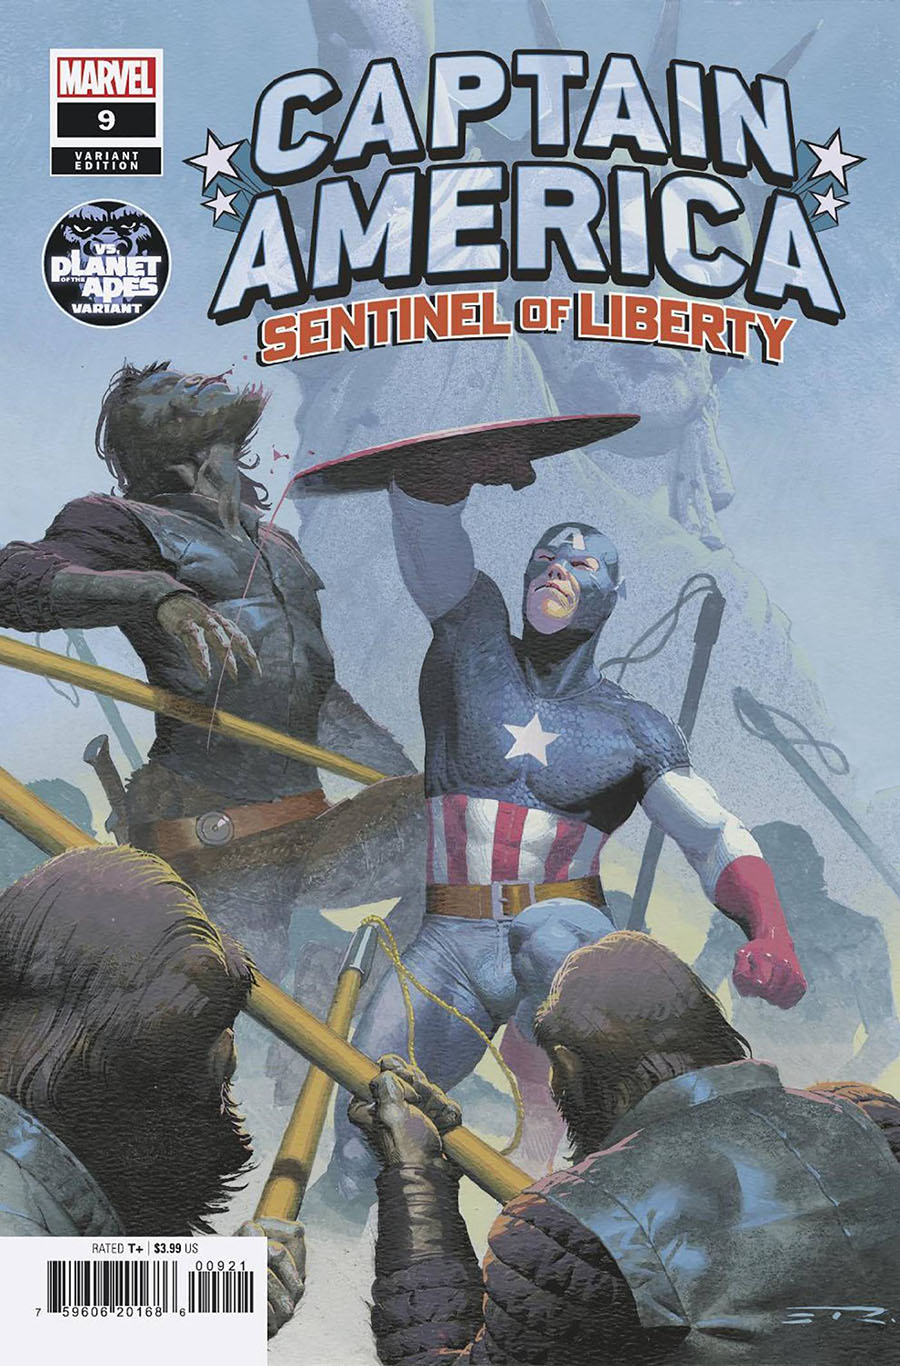 Captain America Sentinel Of Liberty Vol 2 #9 Cover B Variant Esad Ribic Planet Of The Apes Cover